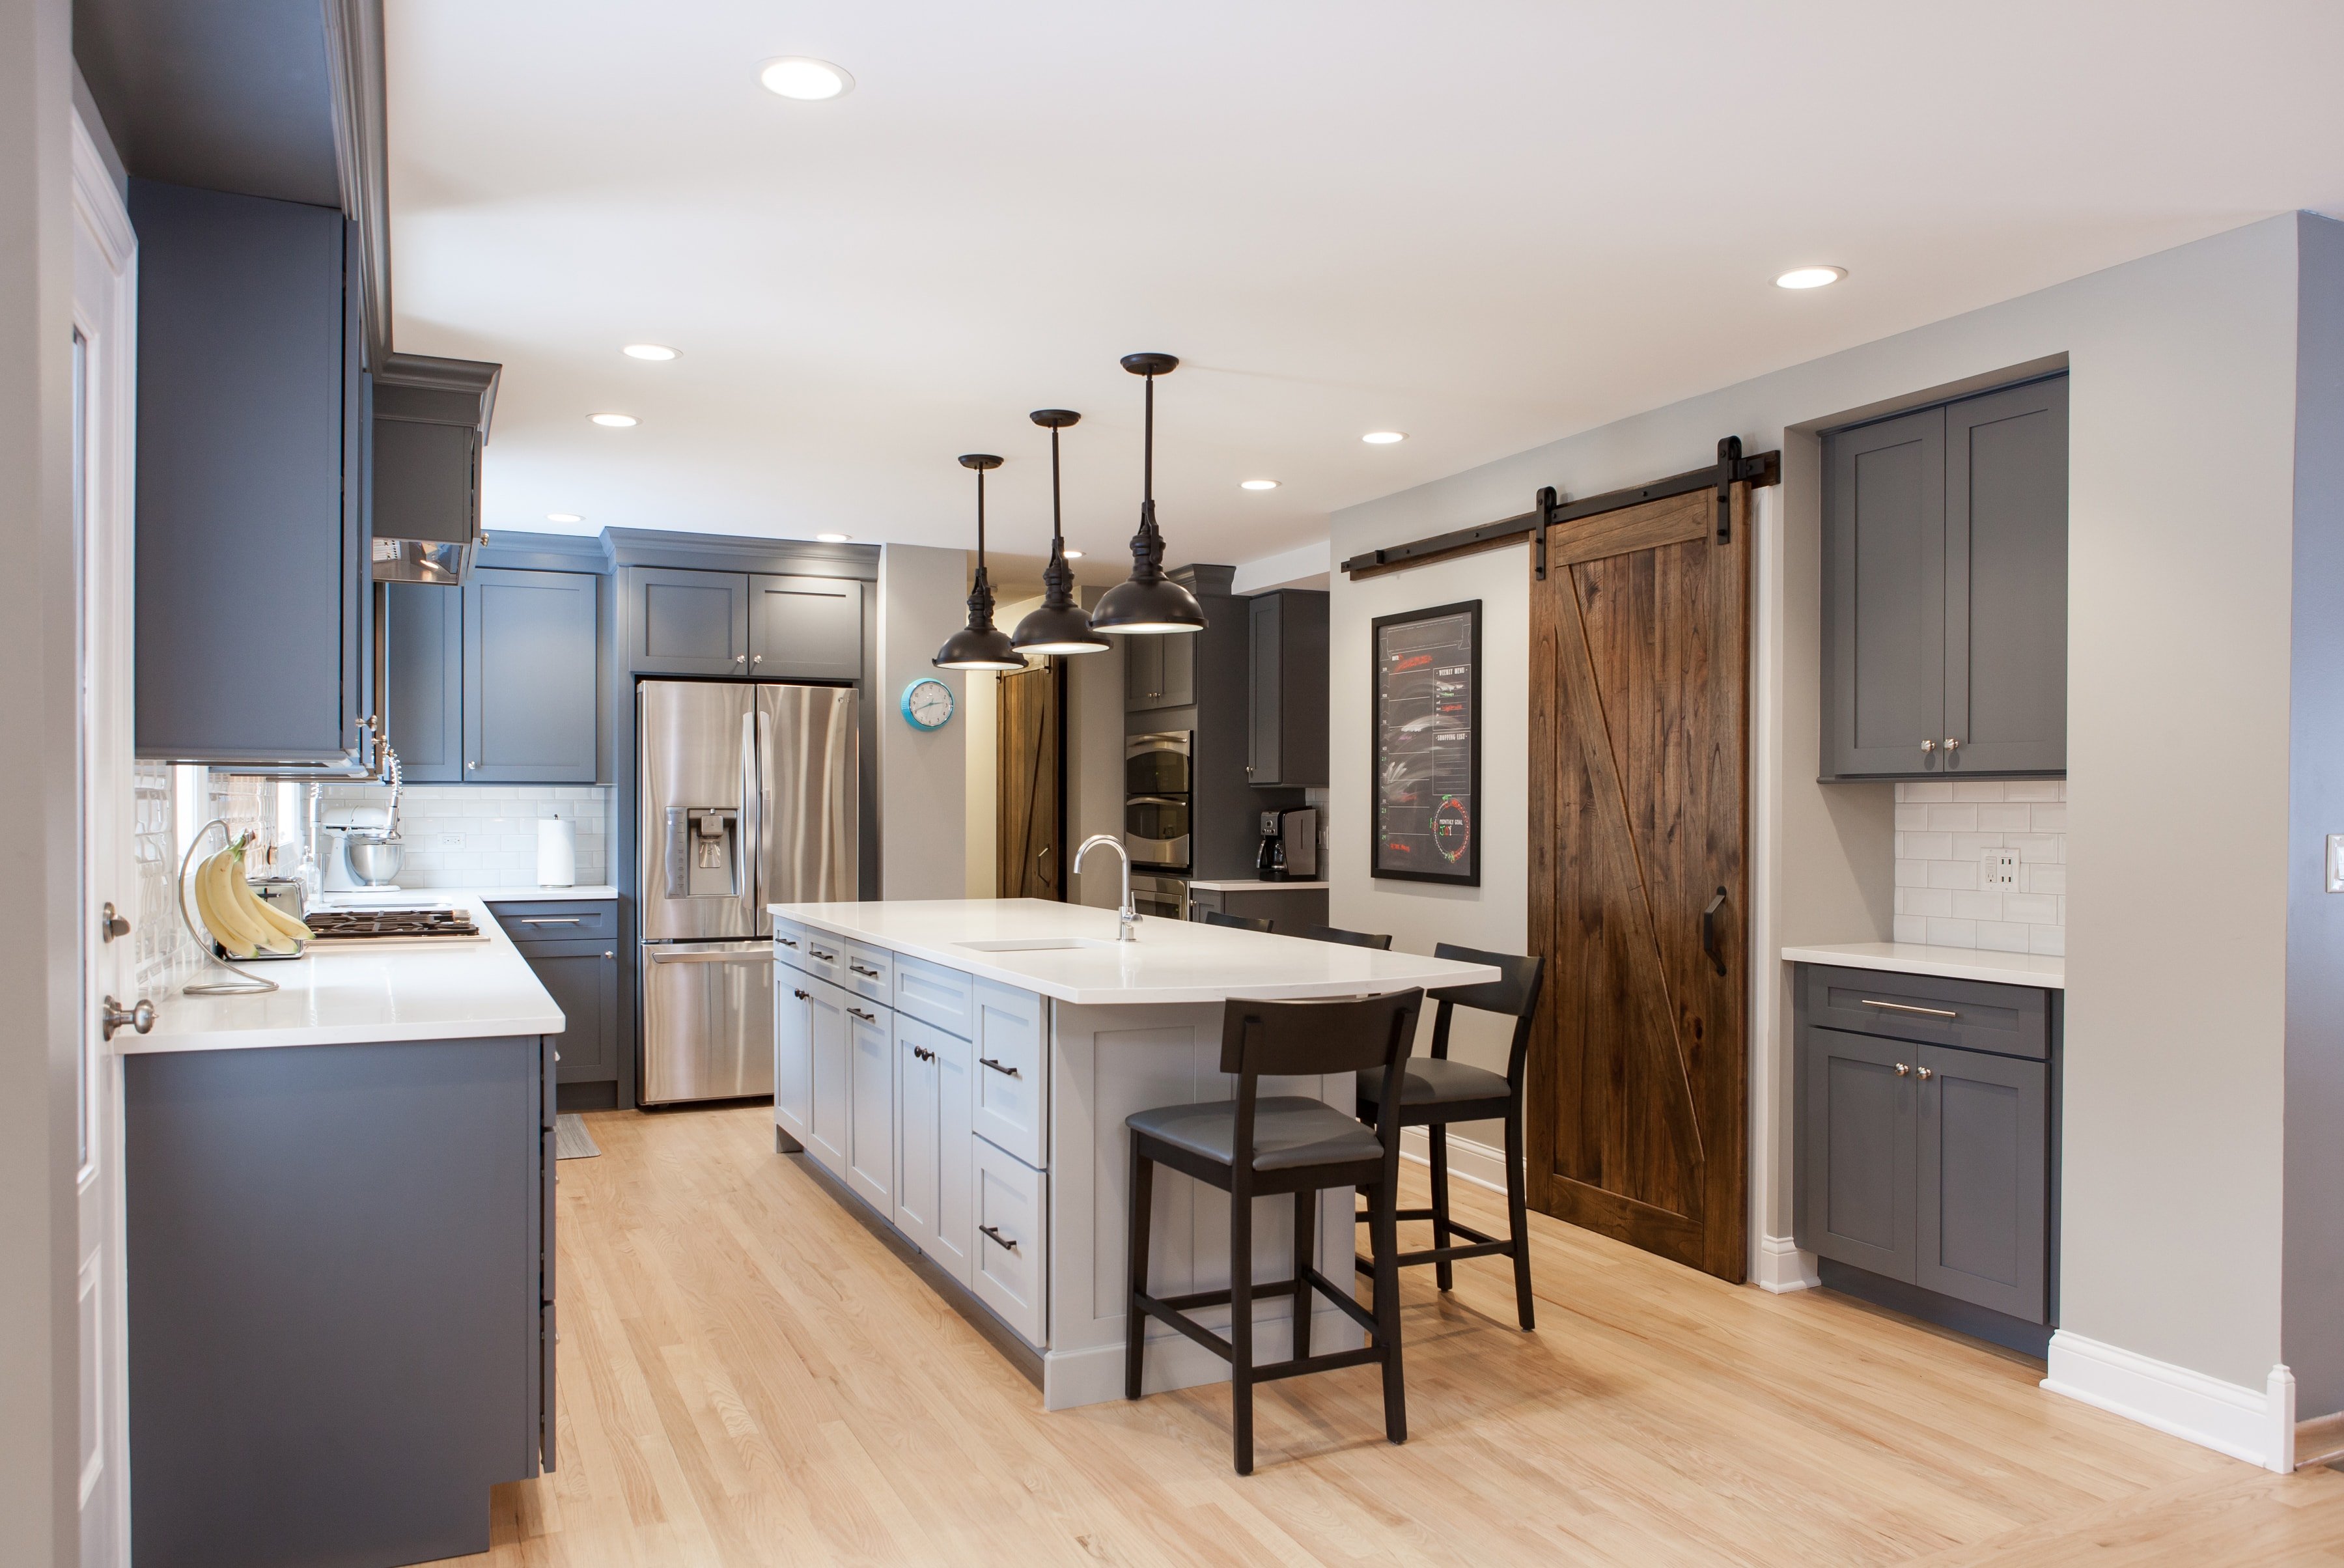 Kitchen Remodel Cost In Chicago, How Much Money Would It Cost To Remodel A Kitchen